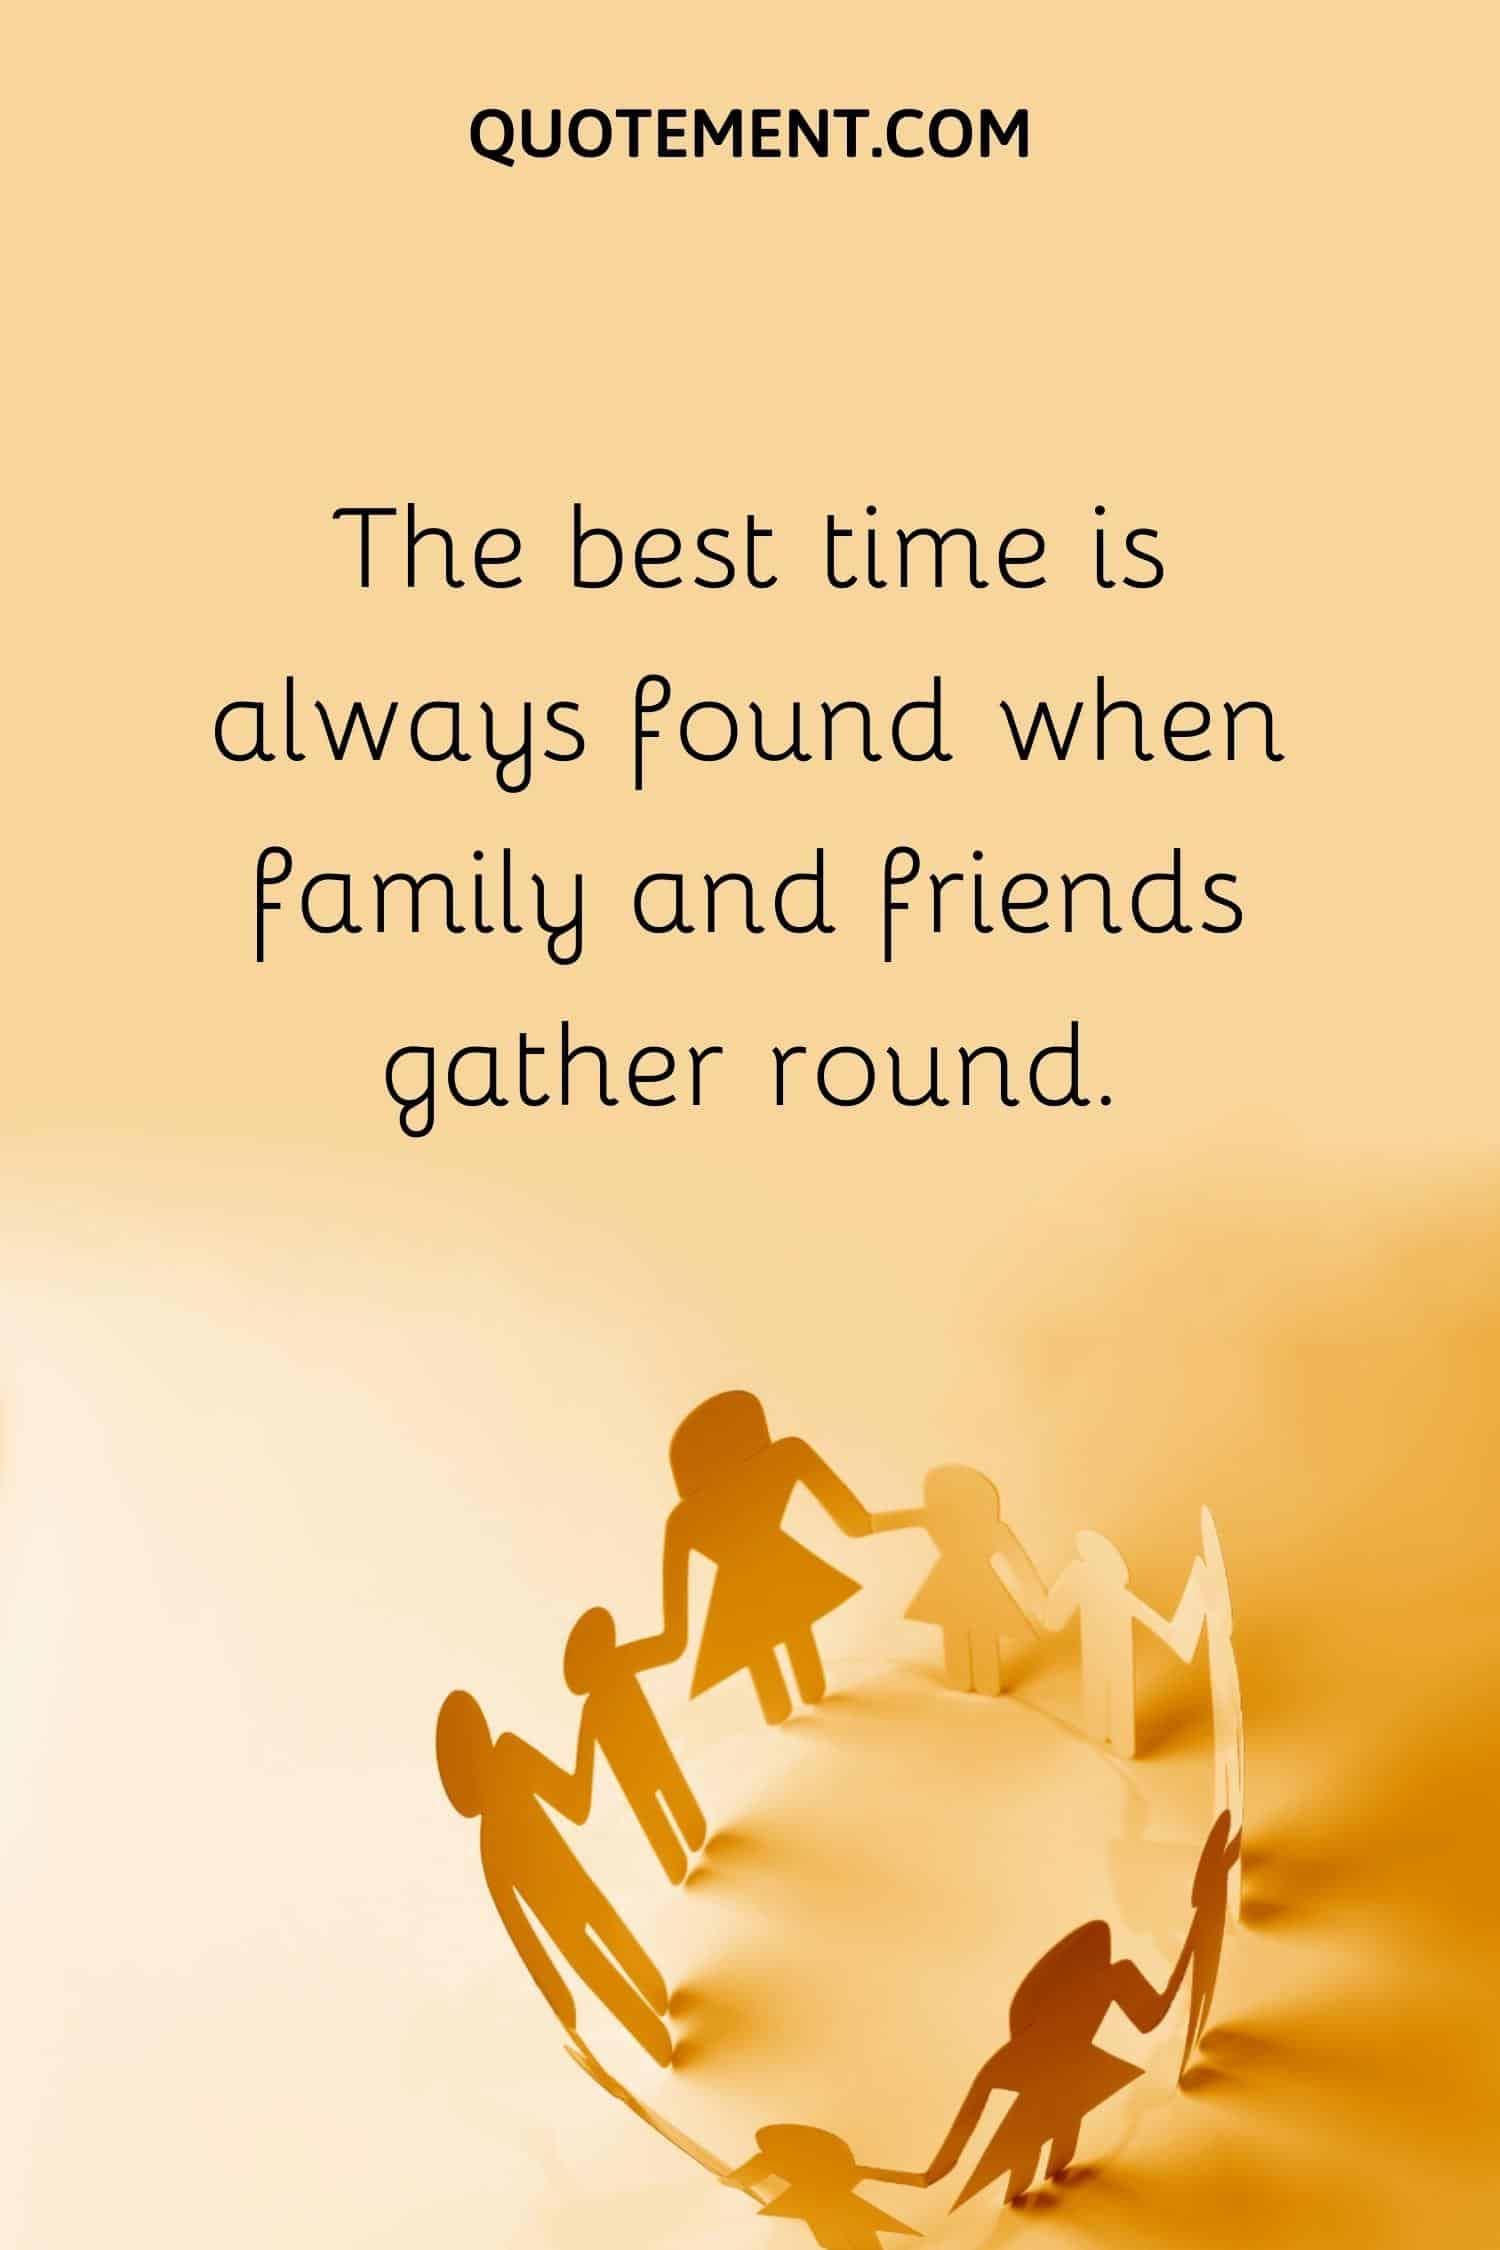 The best time is always found when family and friends gather round.